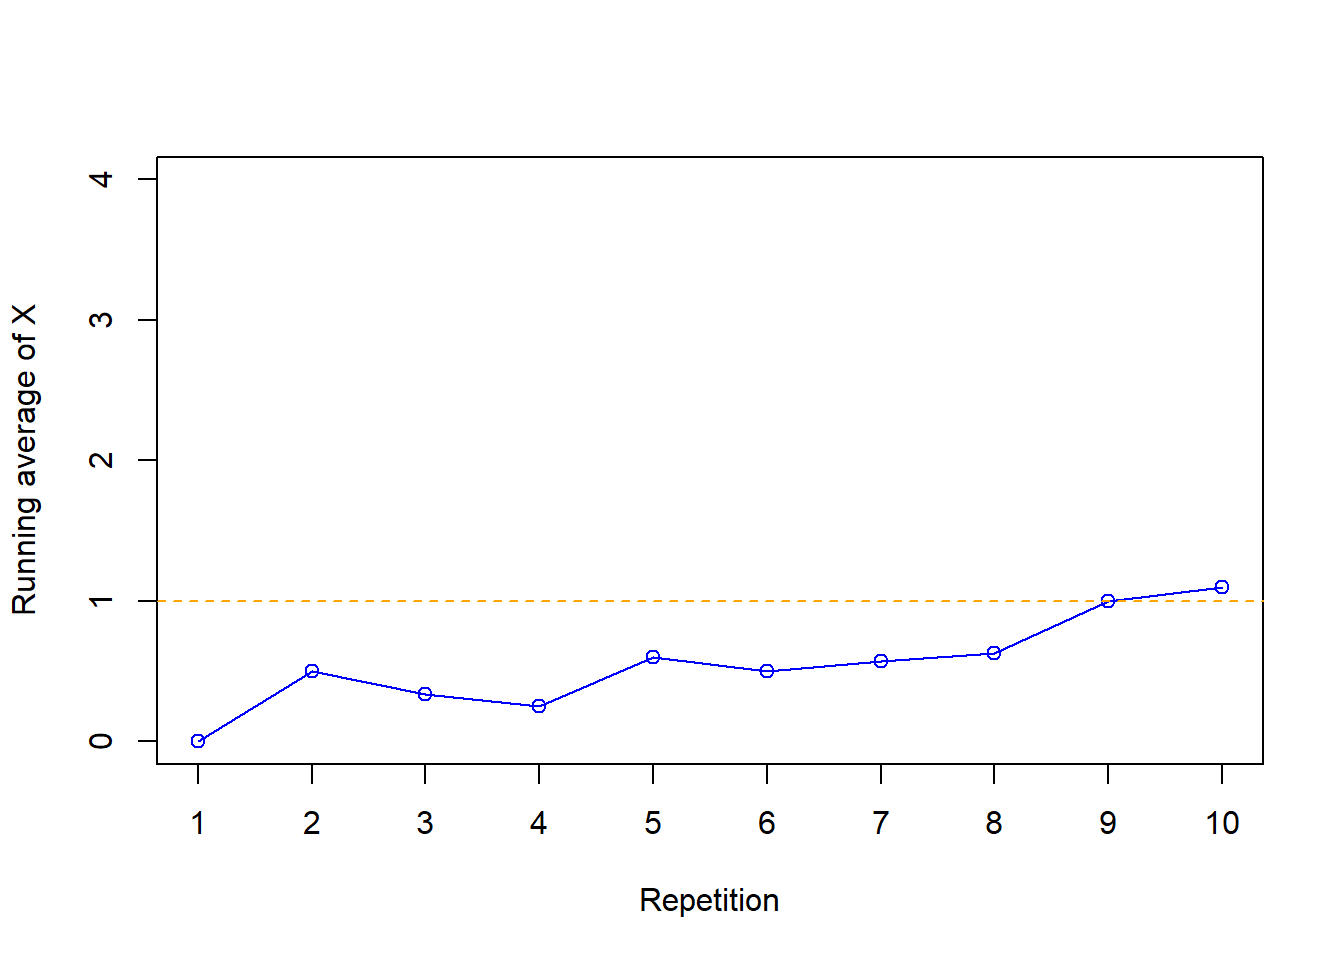 Running average for number of matches in the matching problem based on the simulation results in Table 5.2.